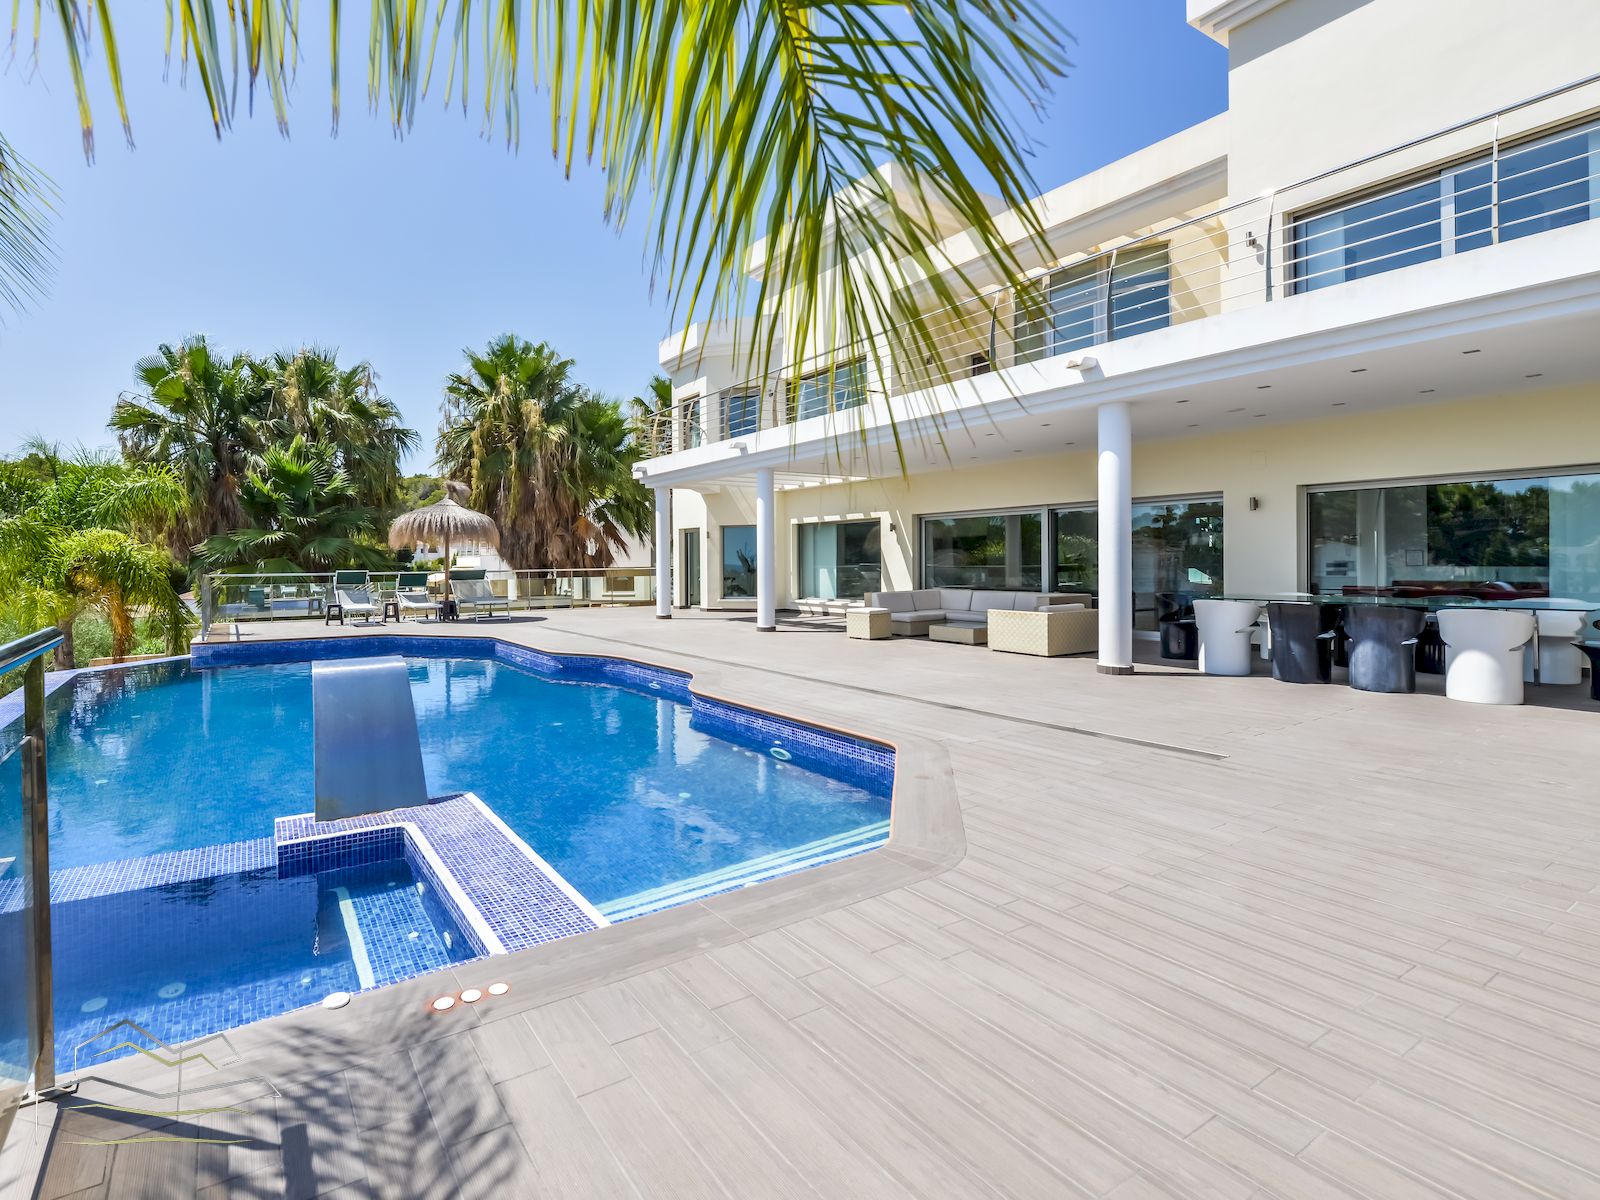 Modern & Luxurious Villa for Sale with Spa & Ocean View